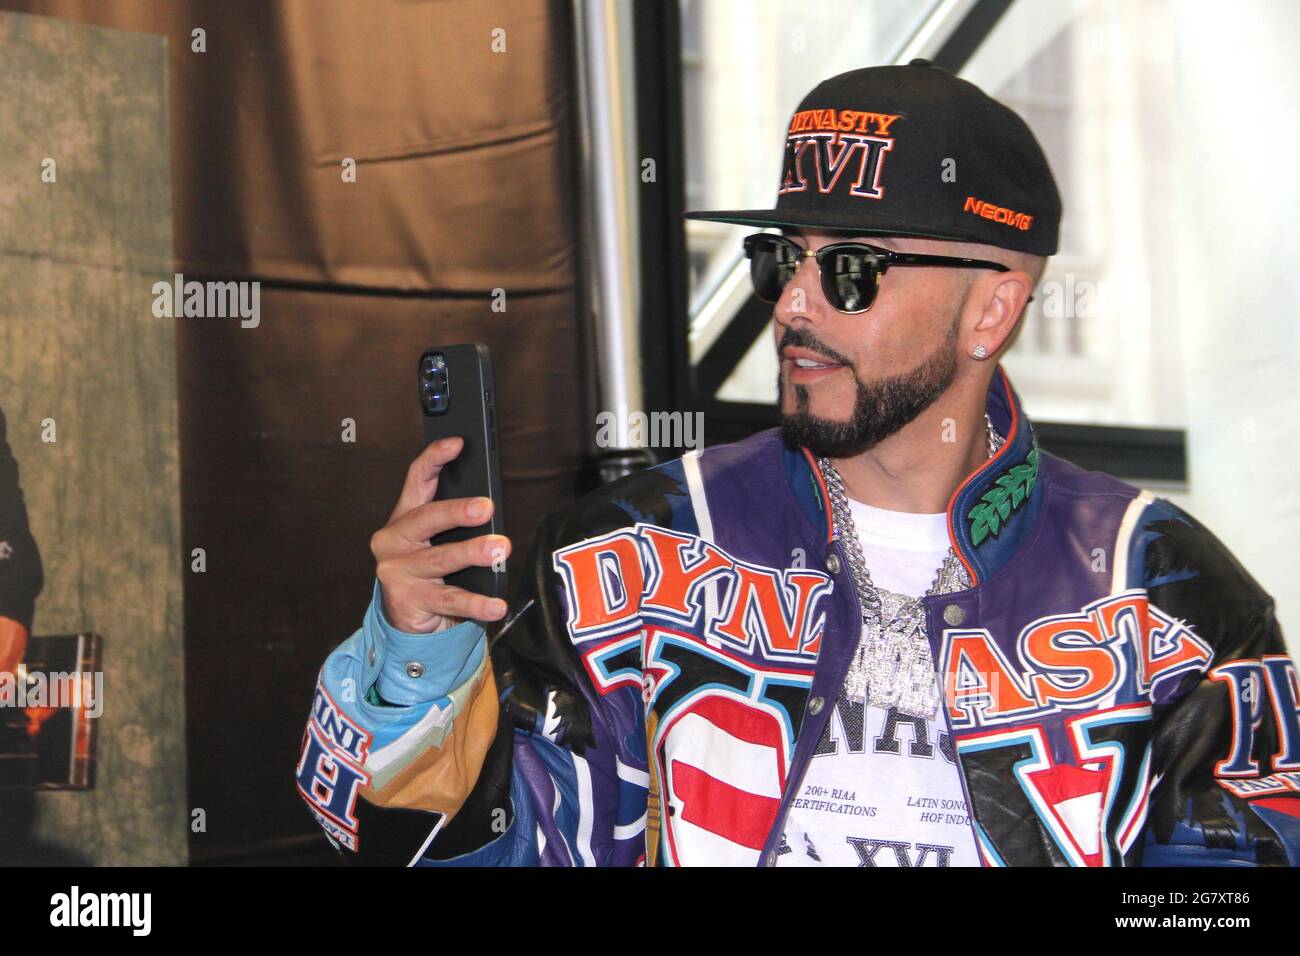 New York, NY, USA. 16th July, 2021. Yandel at the Tainy & Yandel press conference and meet and greet promoting the premiere of album 'Dynasty' at PUMA NYC Flagship Store in New York City on July 16, 2021. Credit: Erik Nielsen/Media Punch/Alamy Live News Stock Photo